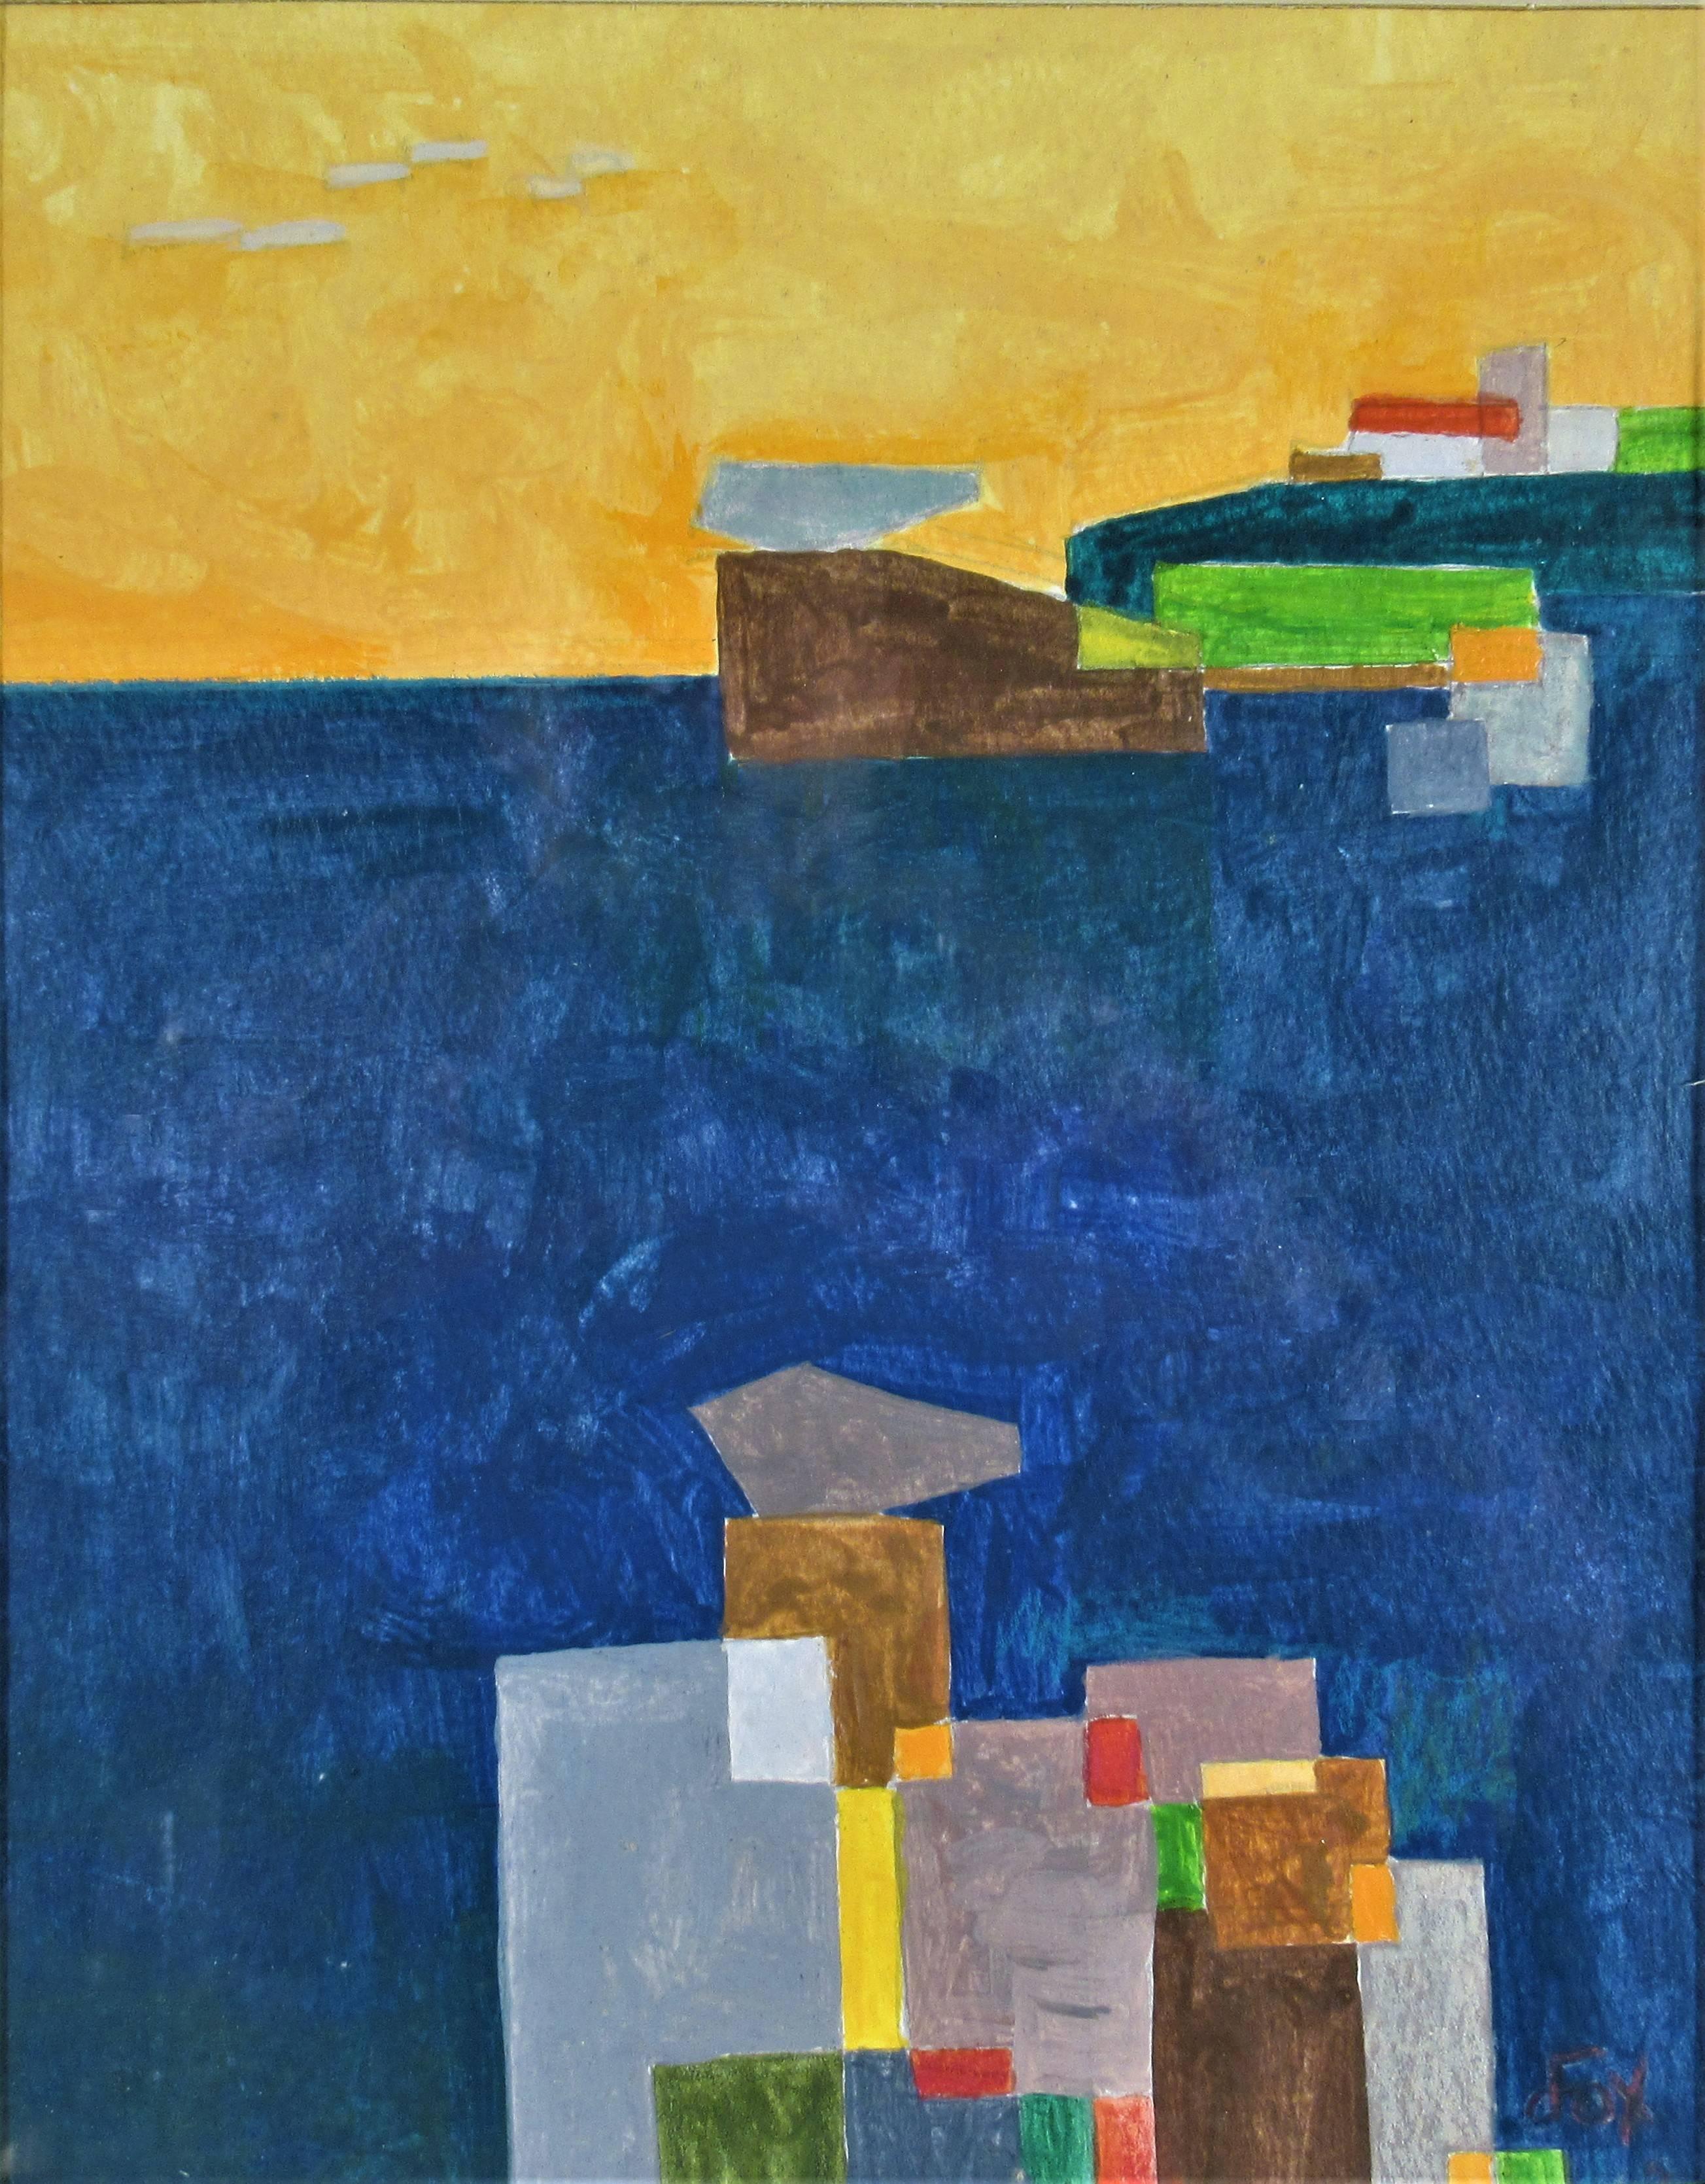 Seascape, Geometric Figure #2 - Painting by Dave Fox